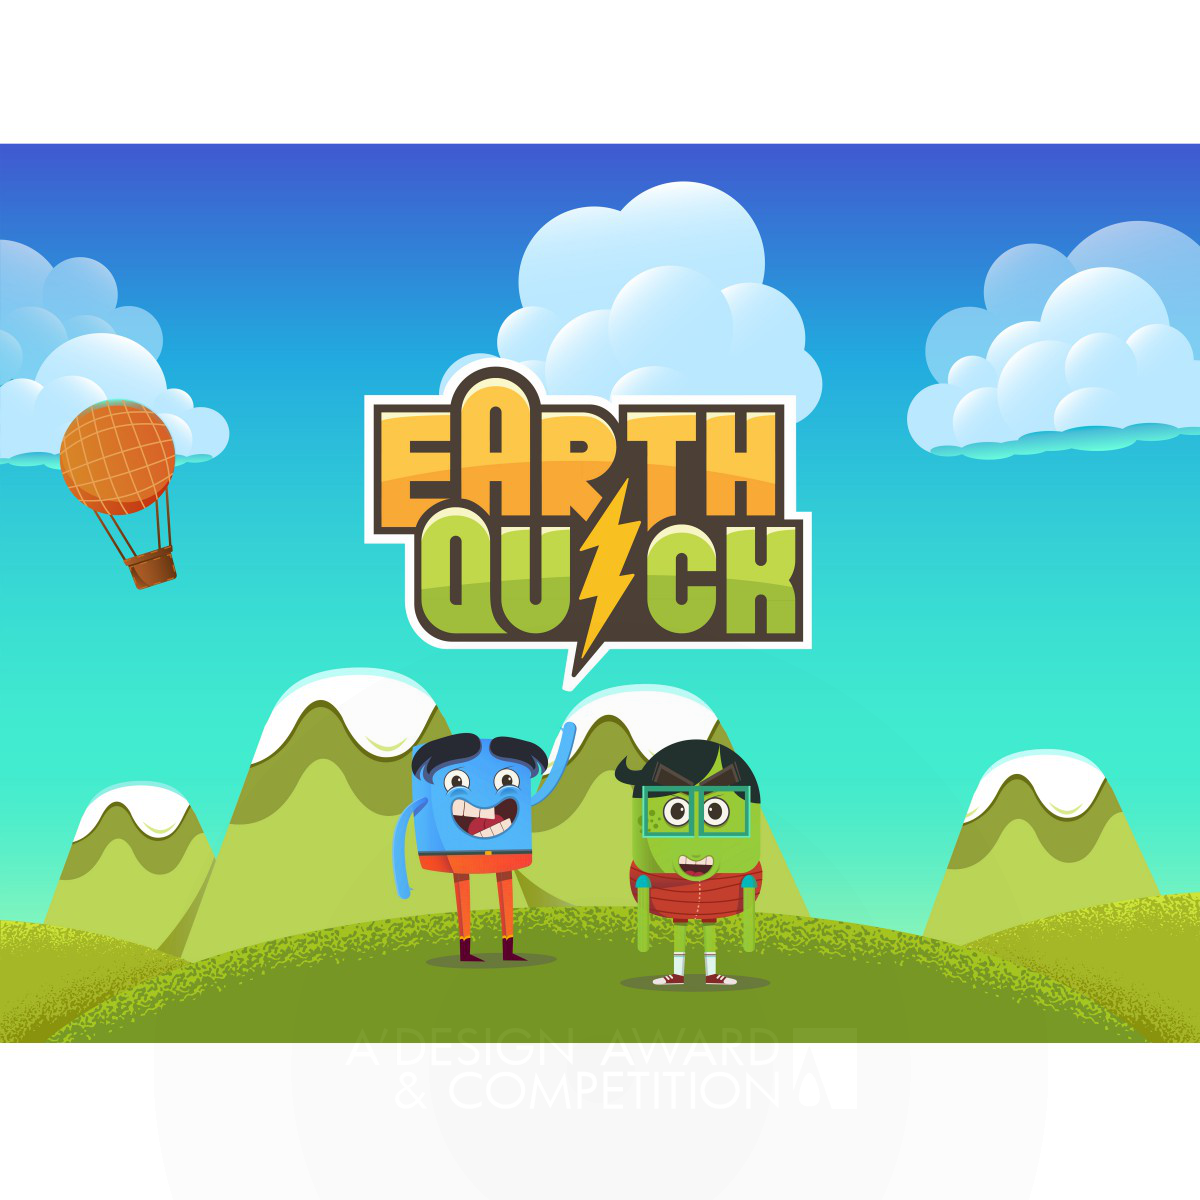 EarthQuick Educative Game App for Children by Tuo Zhang